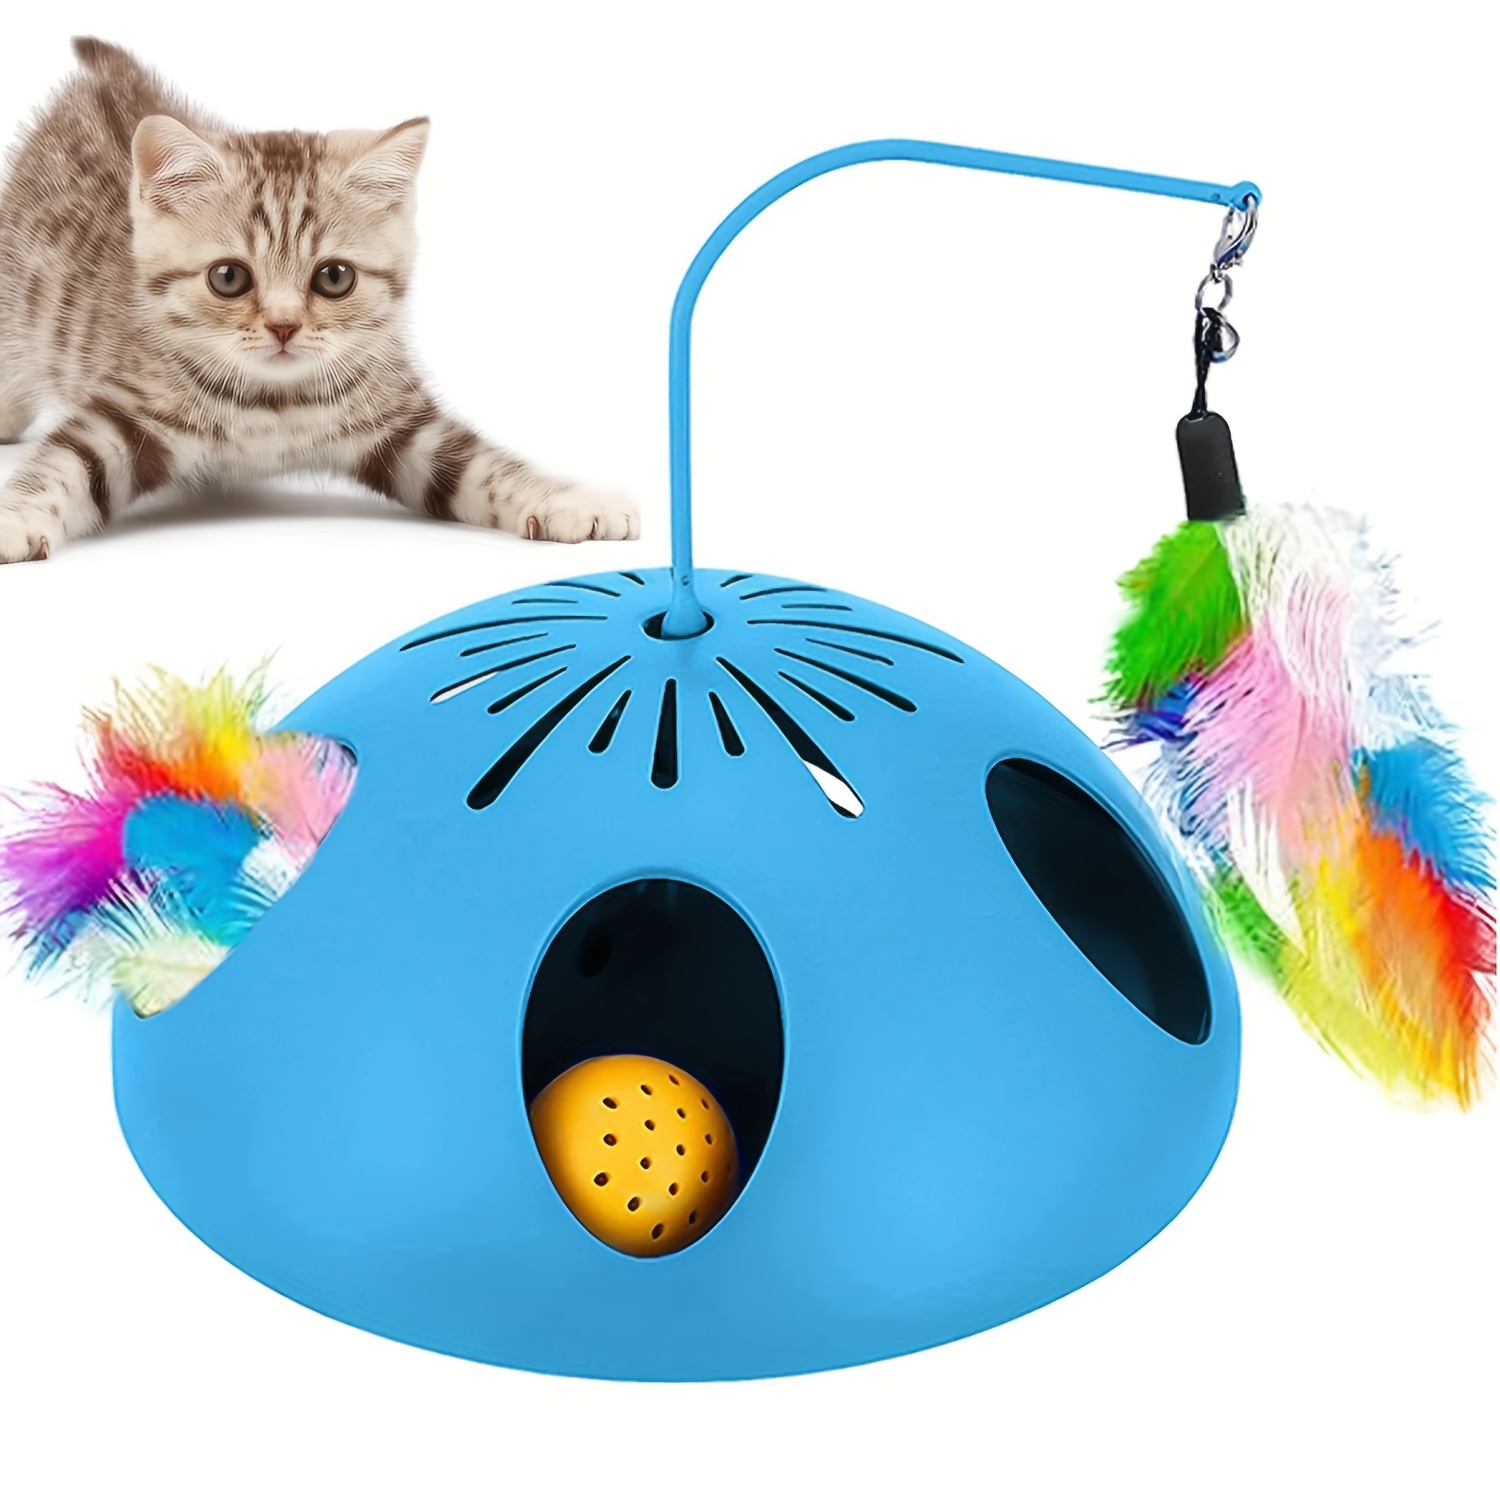 

3-in-1 Interactive Cat Toy With Feather, Mouse Tail & Bell - Adjustable Speeds, Battery-powered (batteries Not Included) For Indoor Play And Exercise